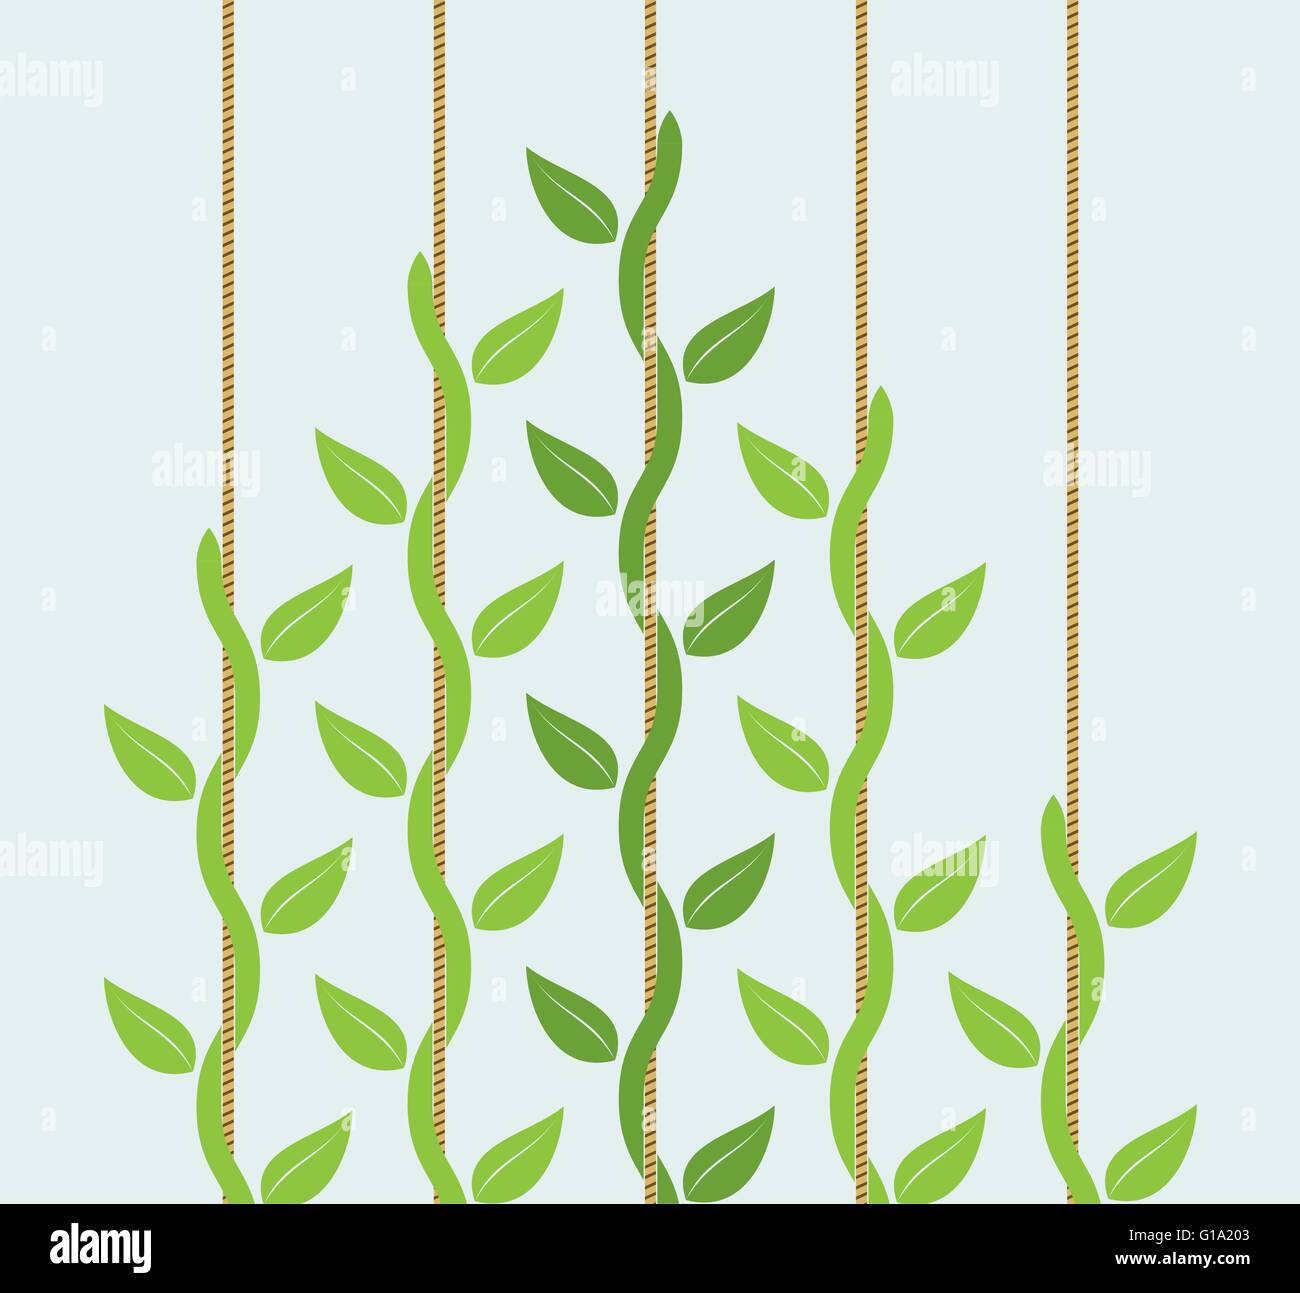 vector leadership or competition concept with climbing plants where leader is stronger than followers Stock Vector